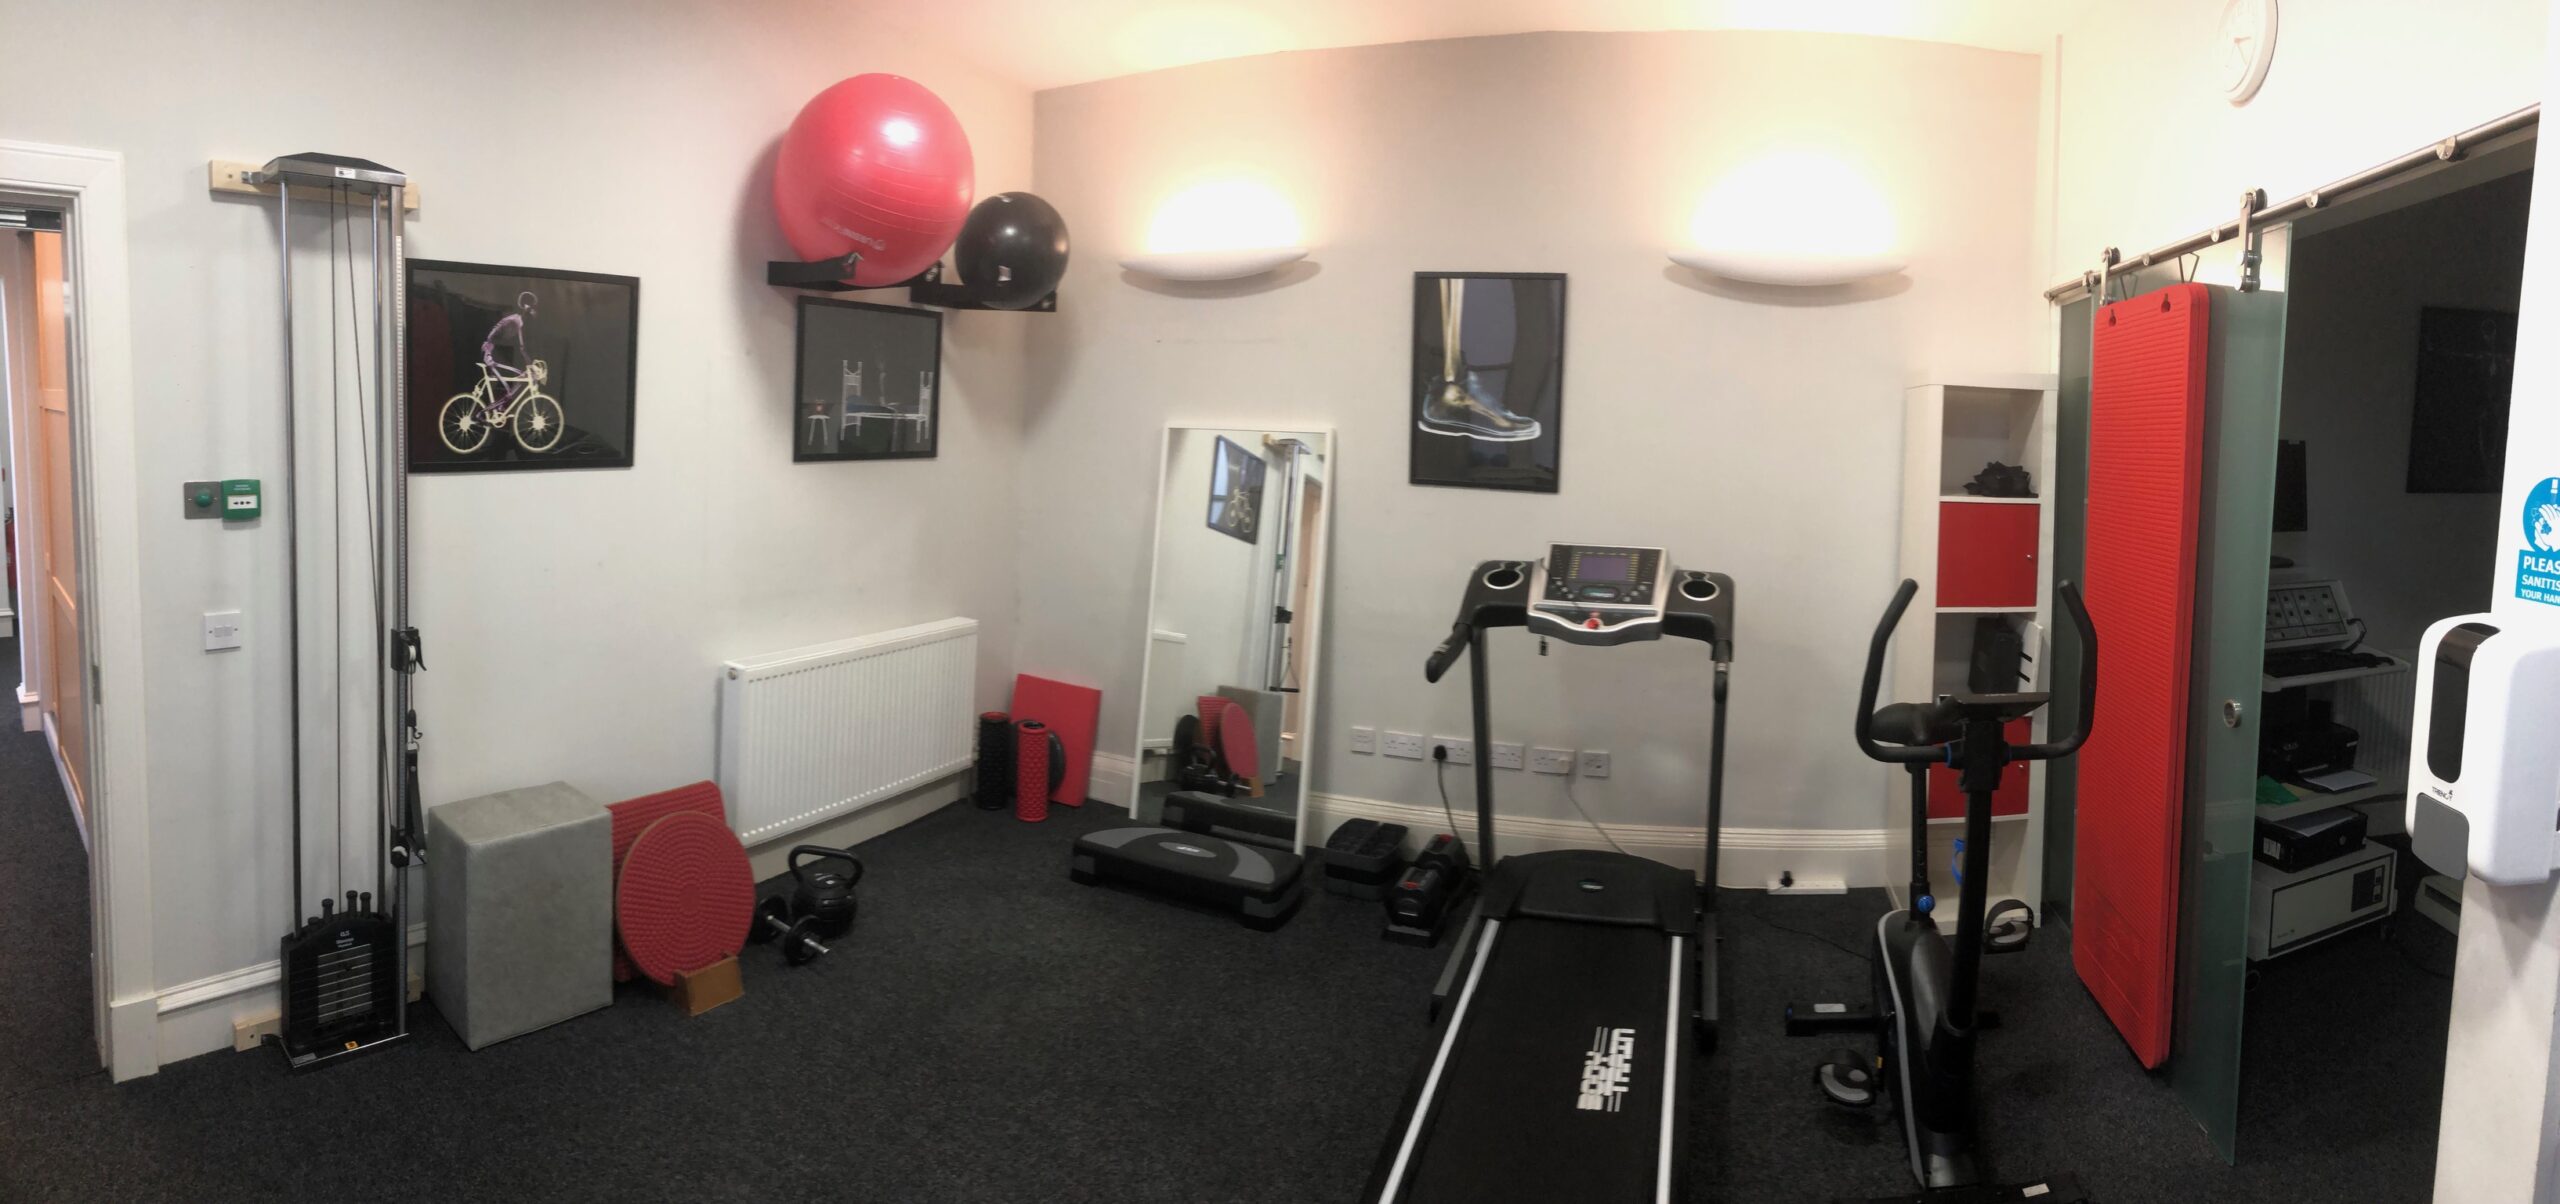 gym equipment at Physis Physiotherapy